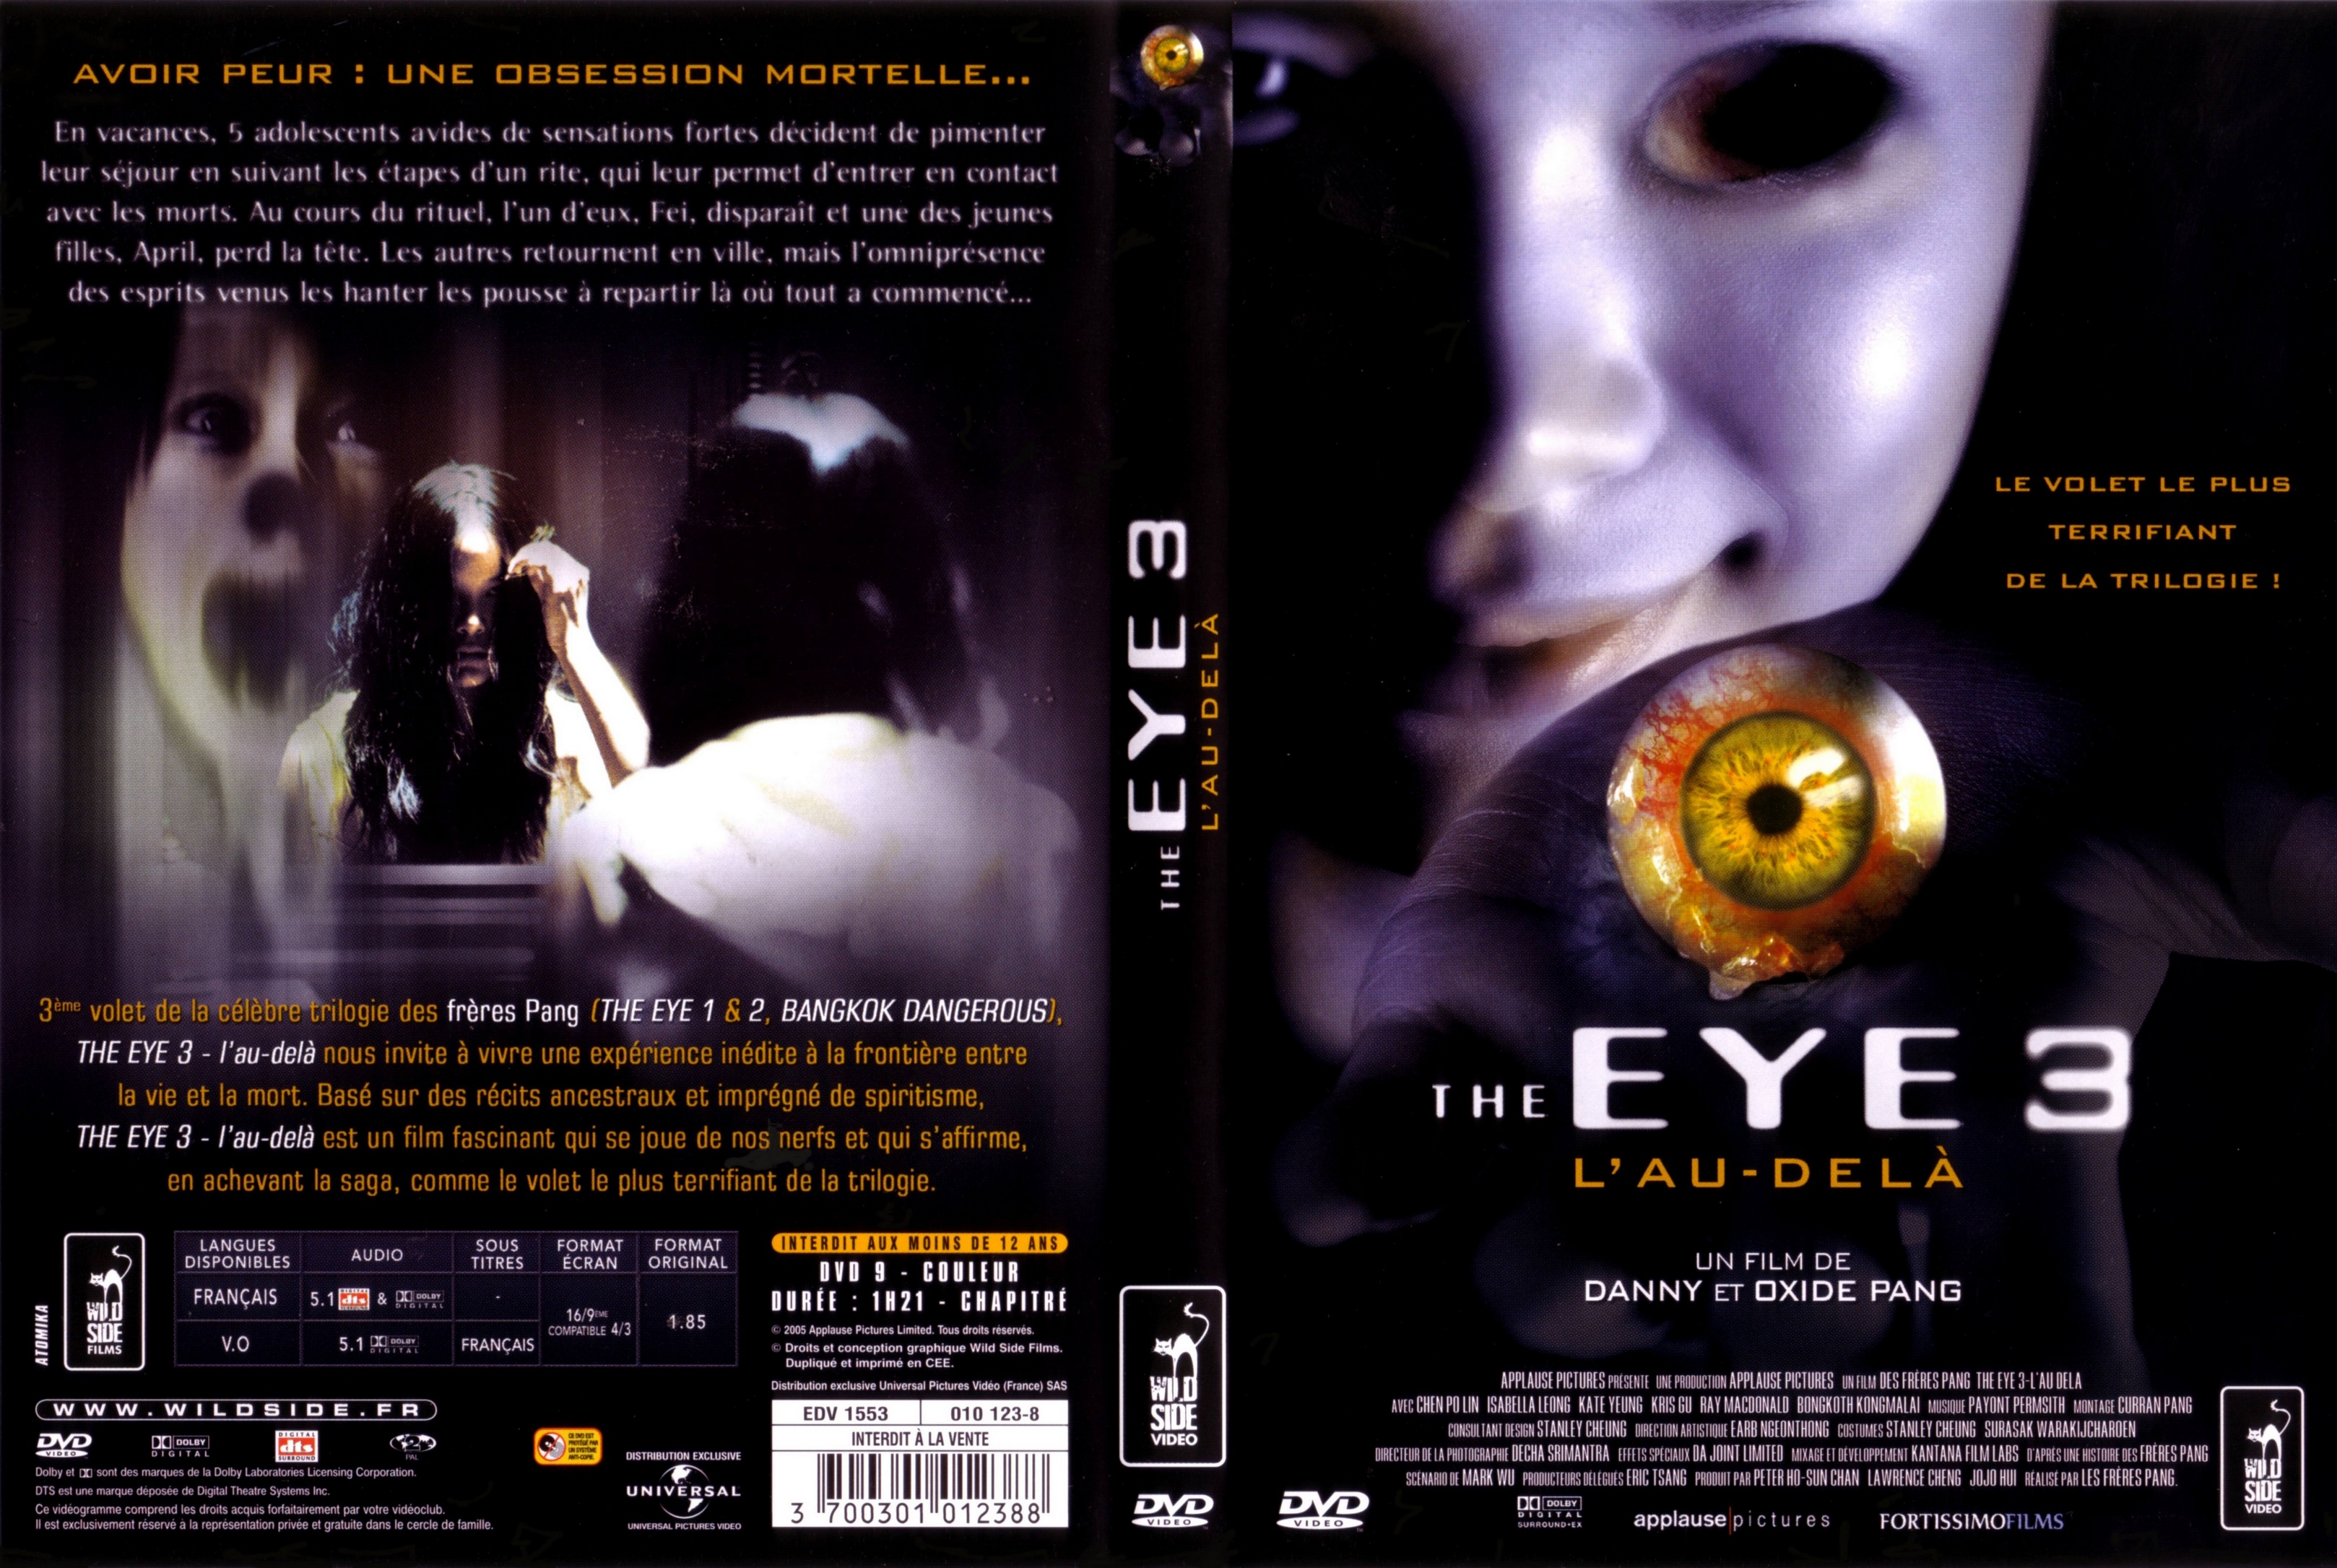 Jaquette DVD The eye 3